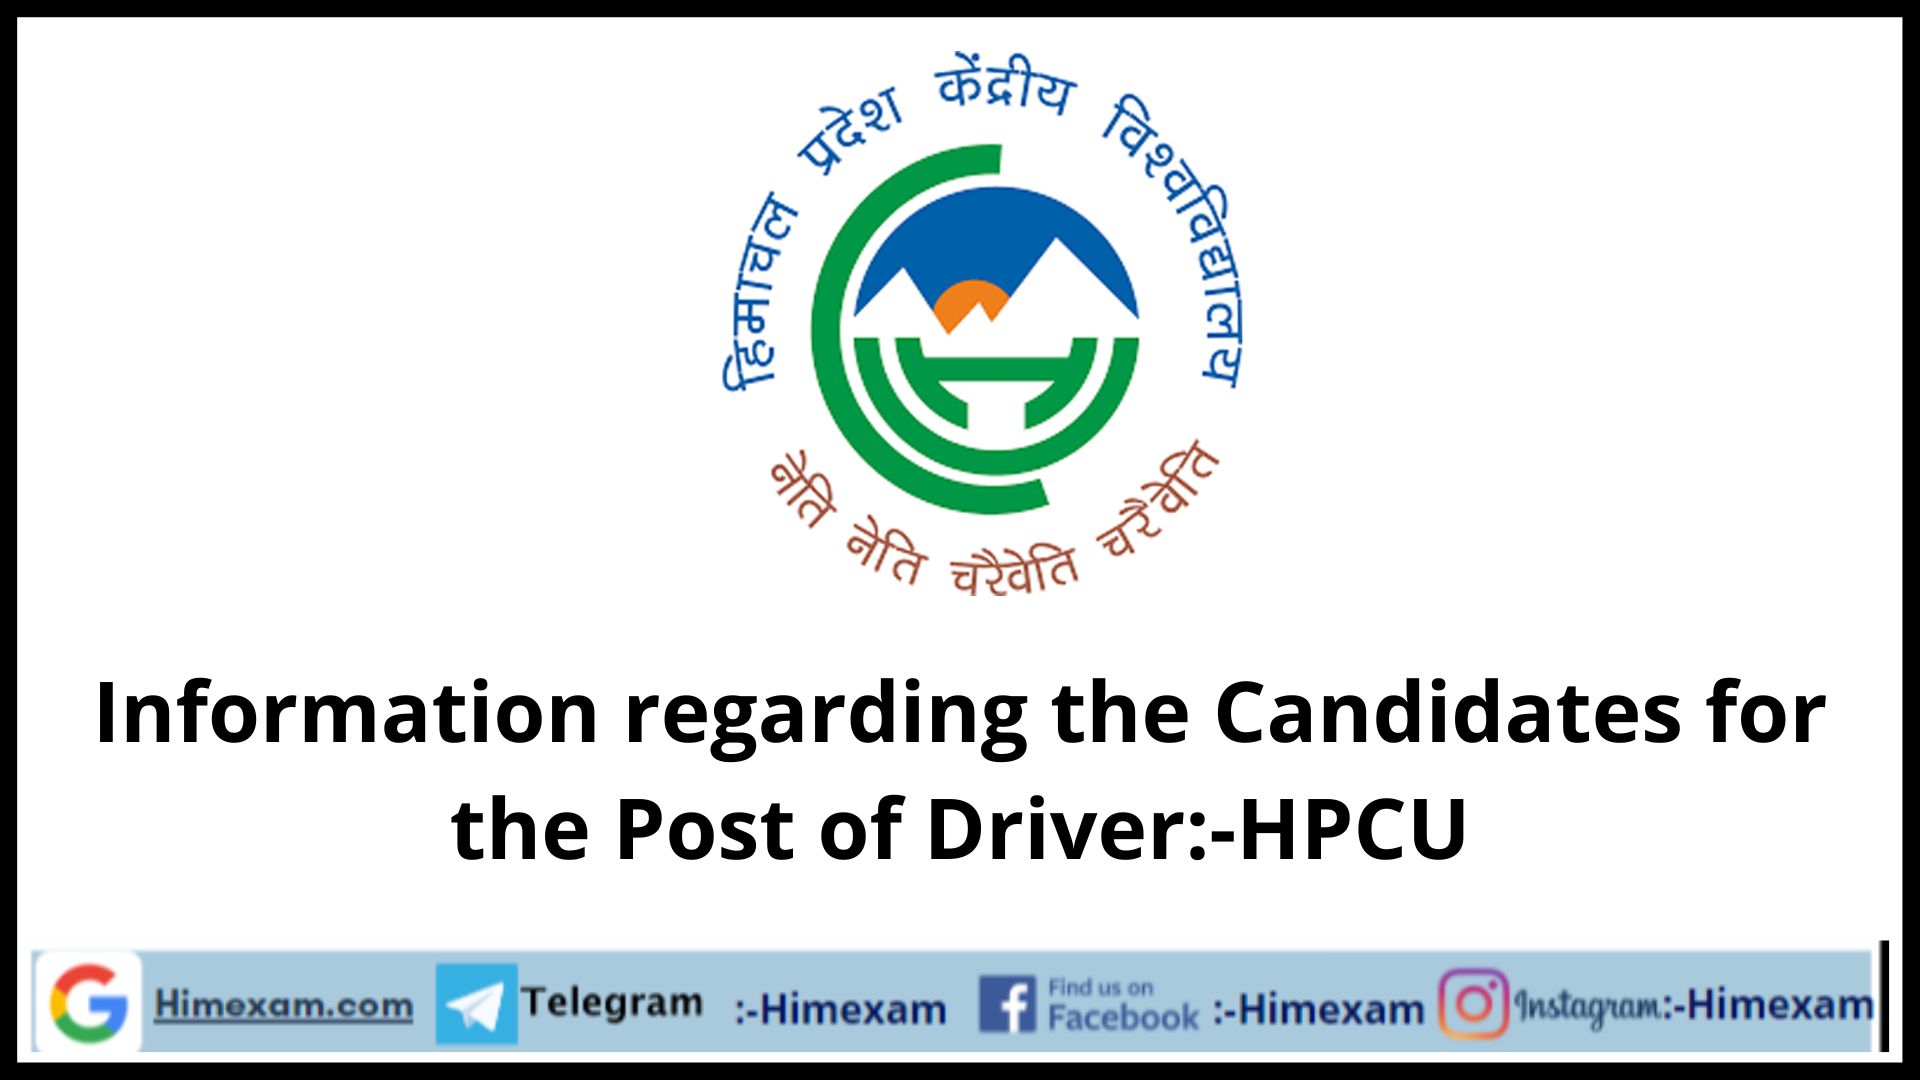 Information regarding the Candidates for the Post of Driver:-HPCU